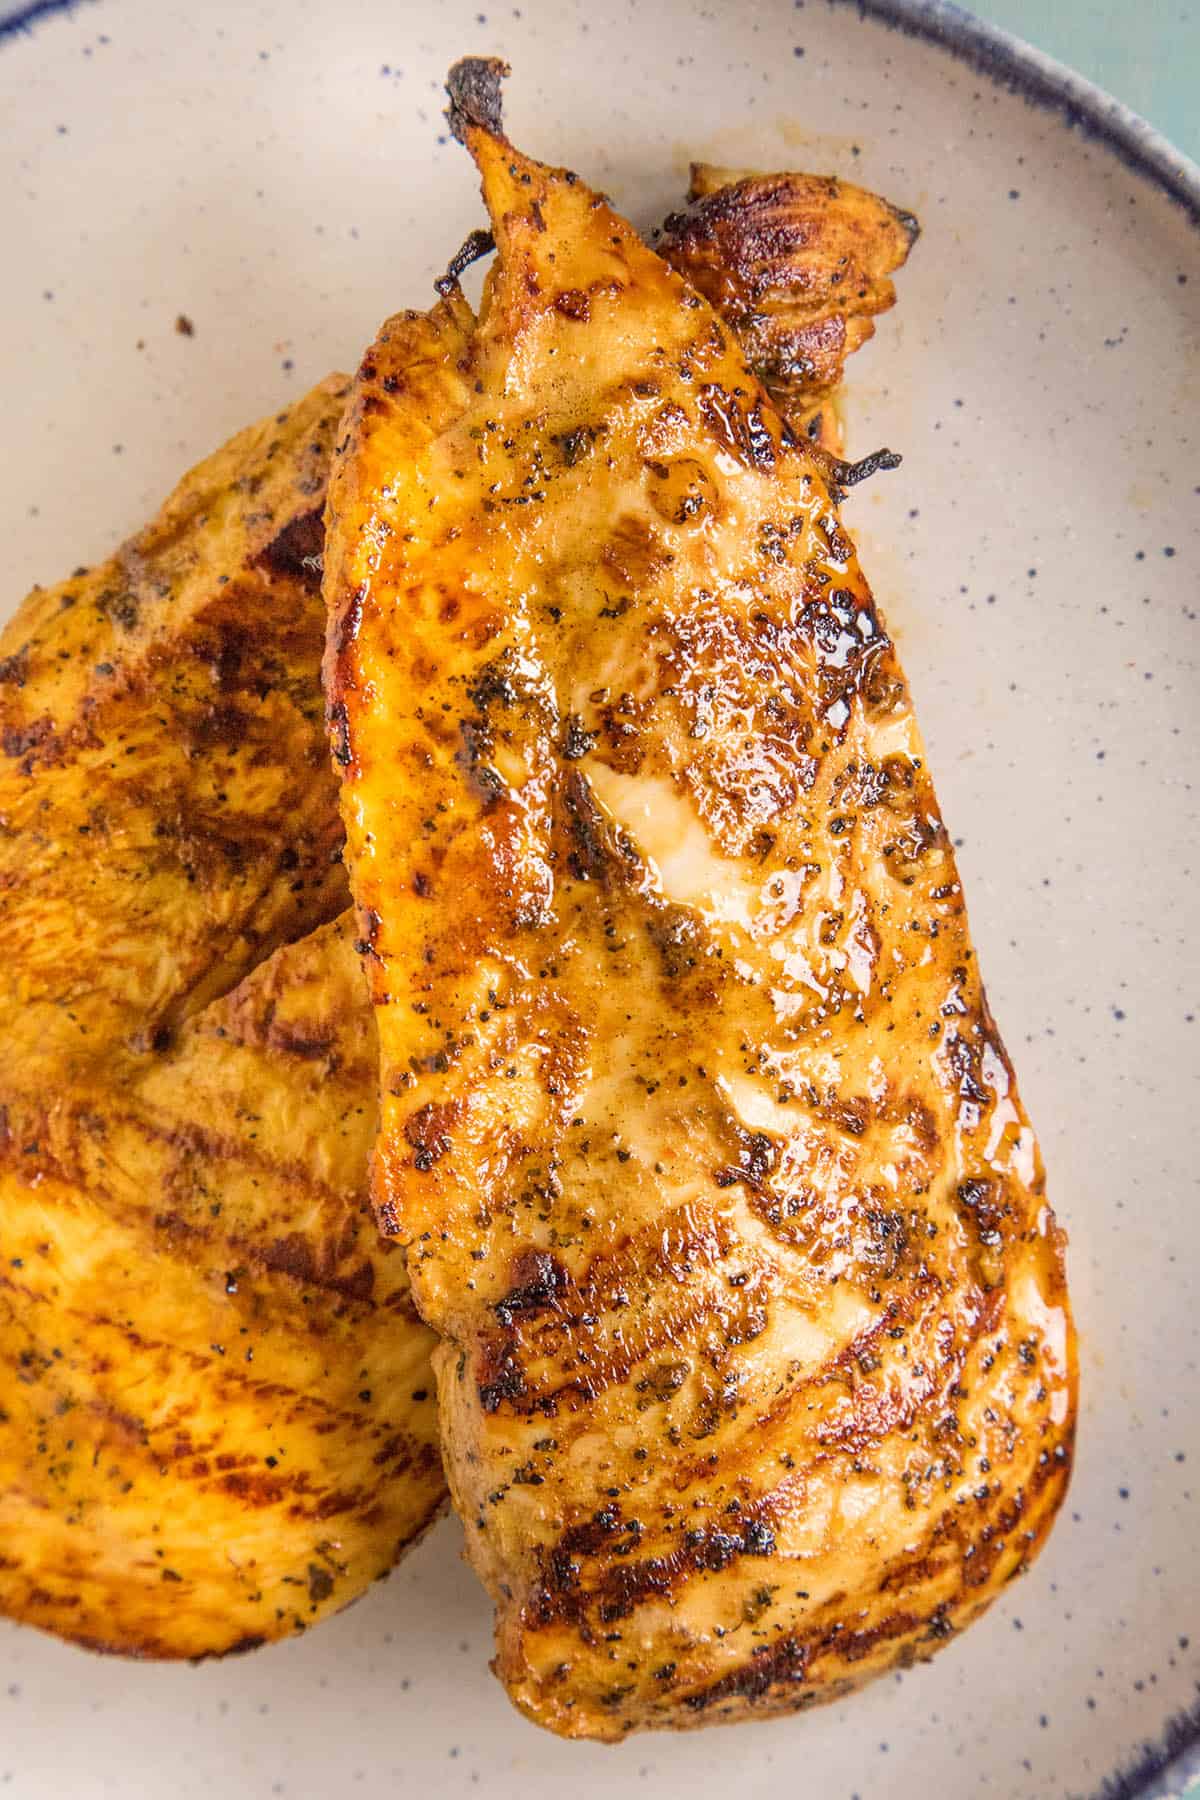 Juicy Chicken That's Been Grilled After Marinating in Our Spicy BBQ Chicken Marinade